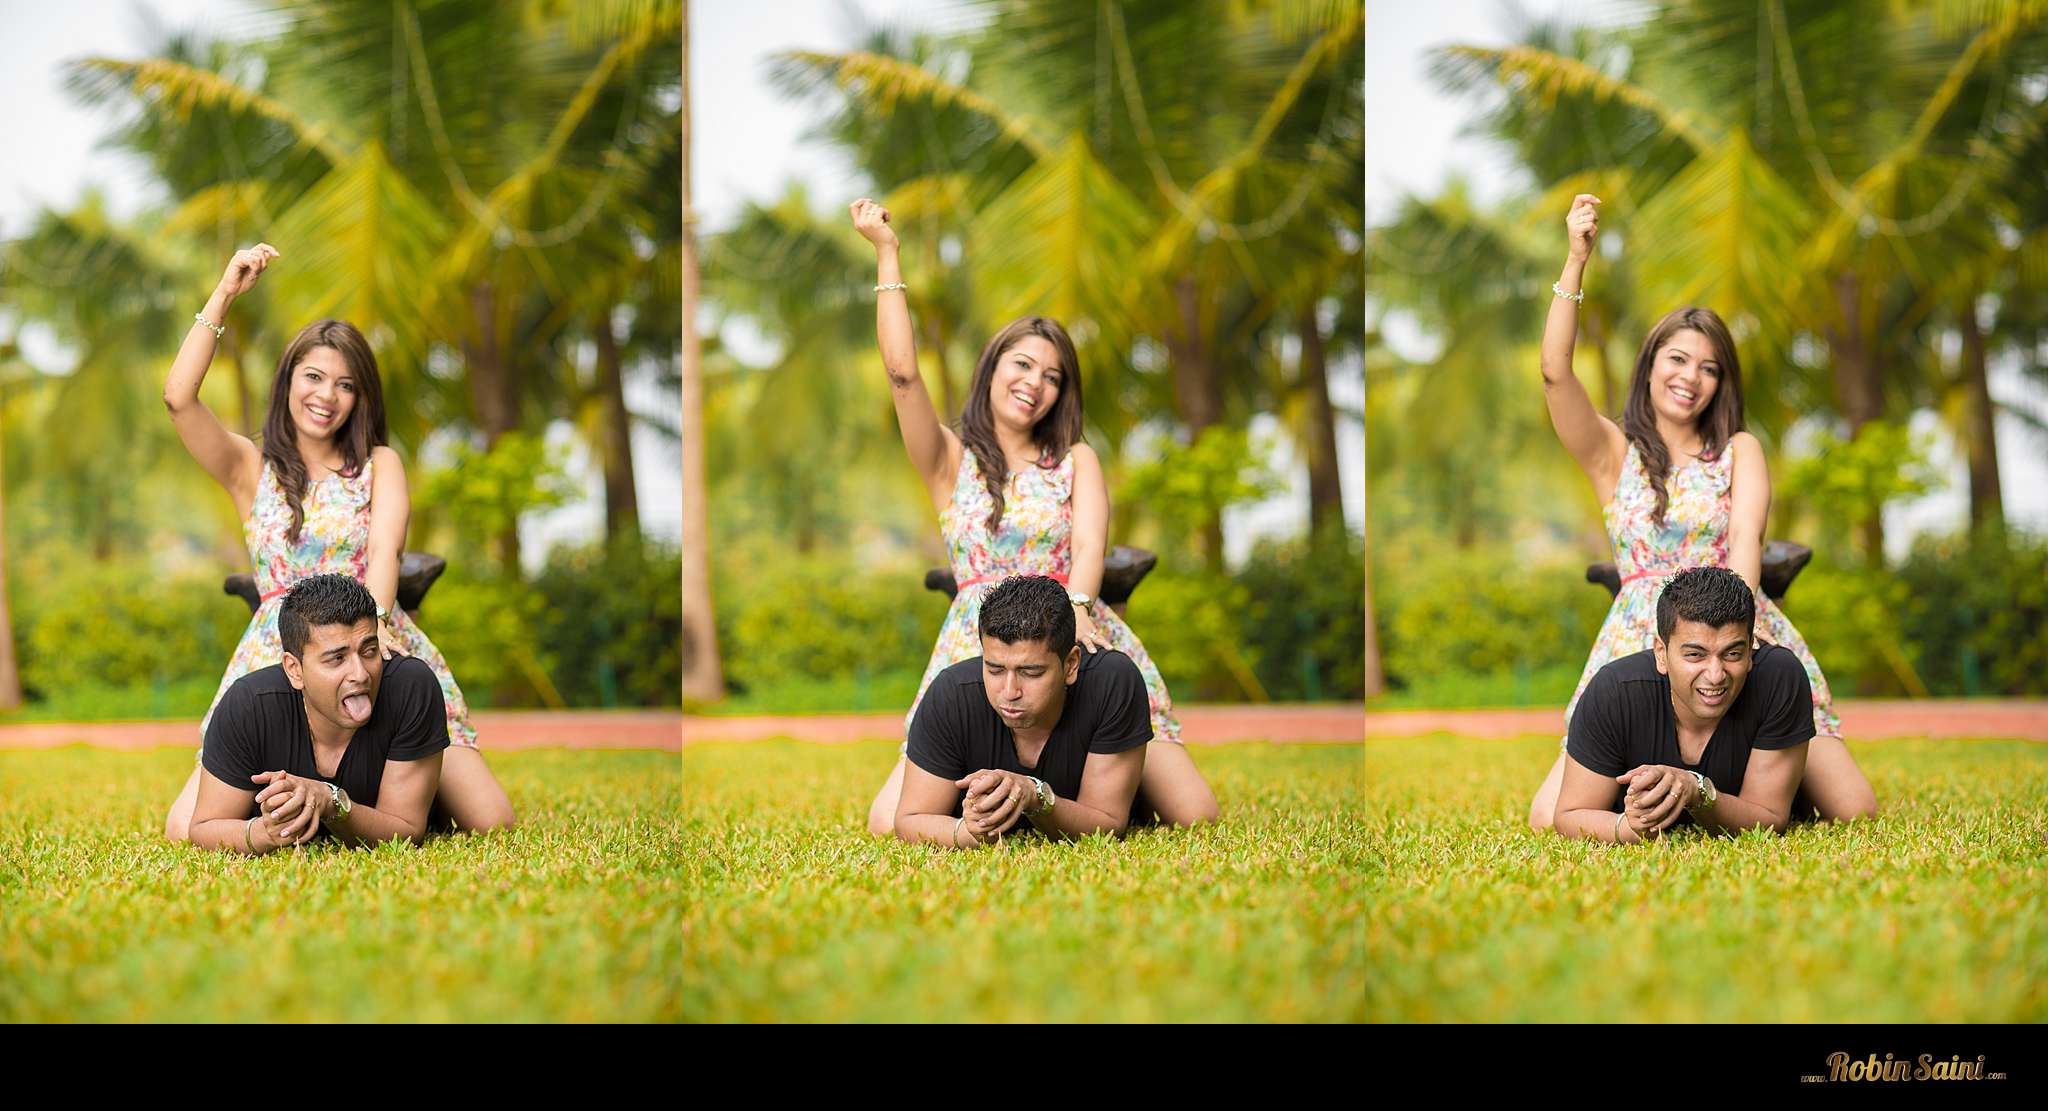 Best tips and Ideas for pre-wedding photoshoot